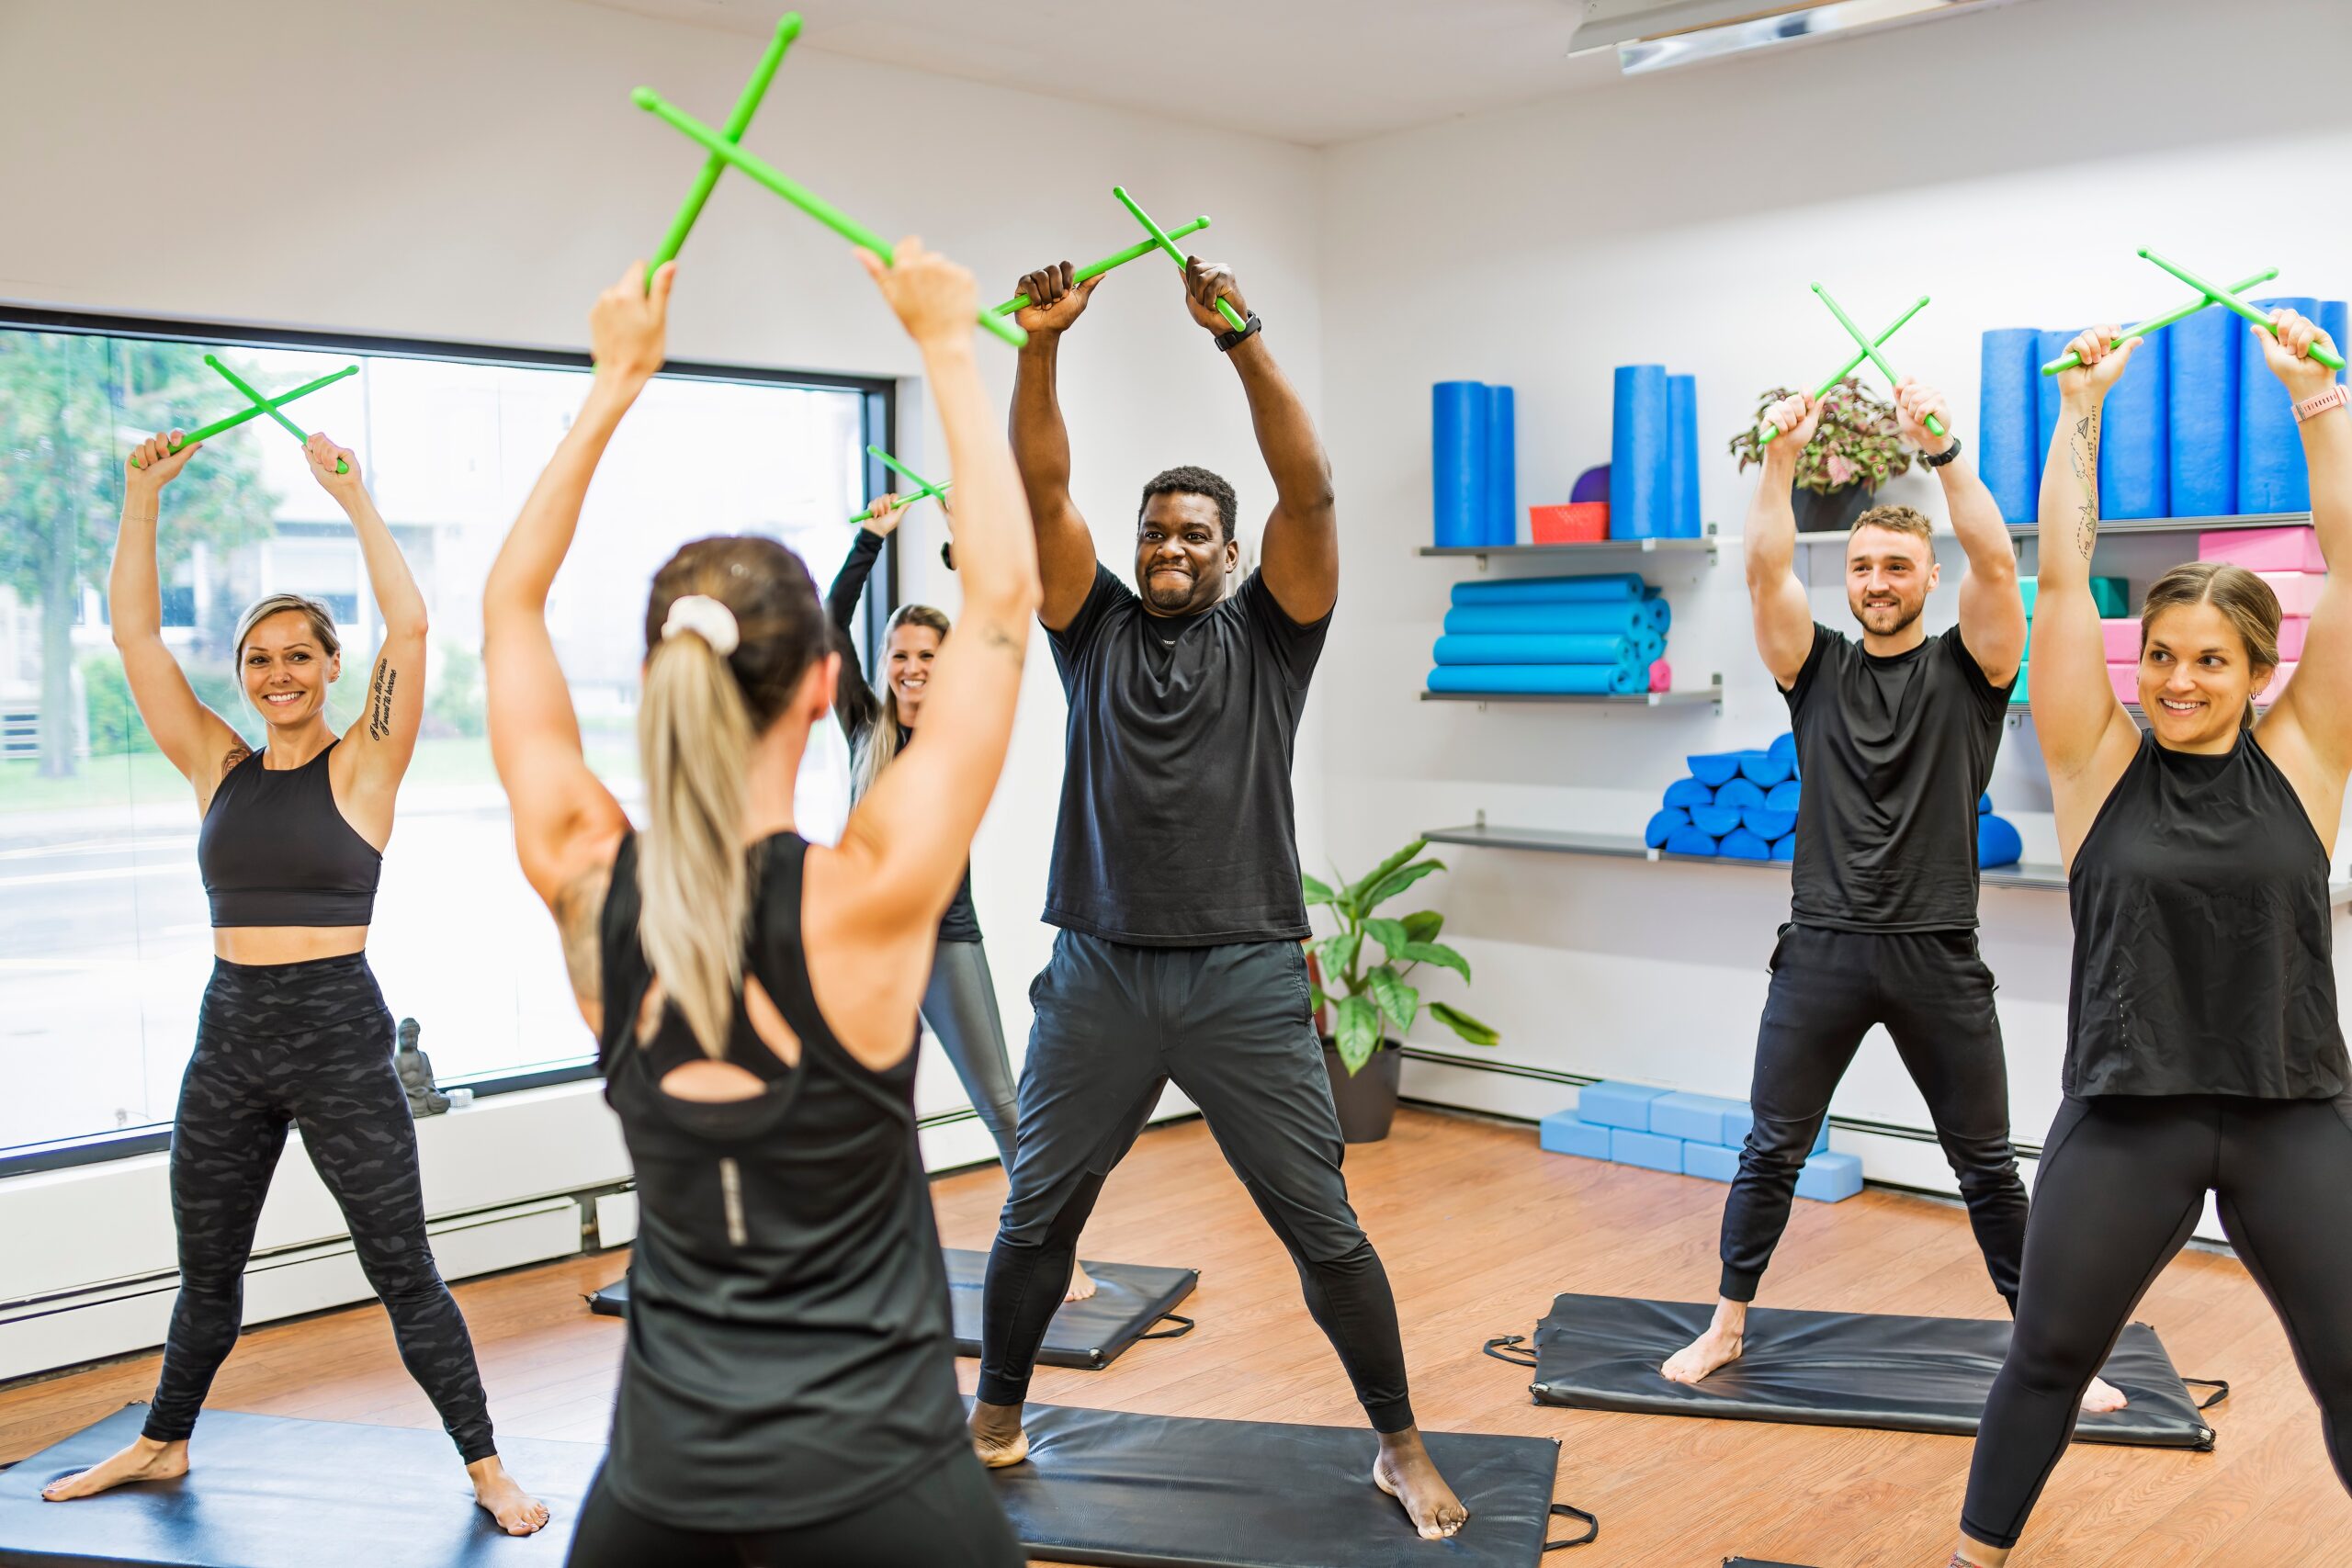 a group of people enjoying a pound fitness class with their drum sticks in the air